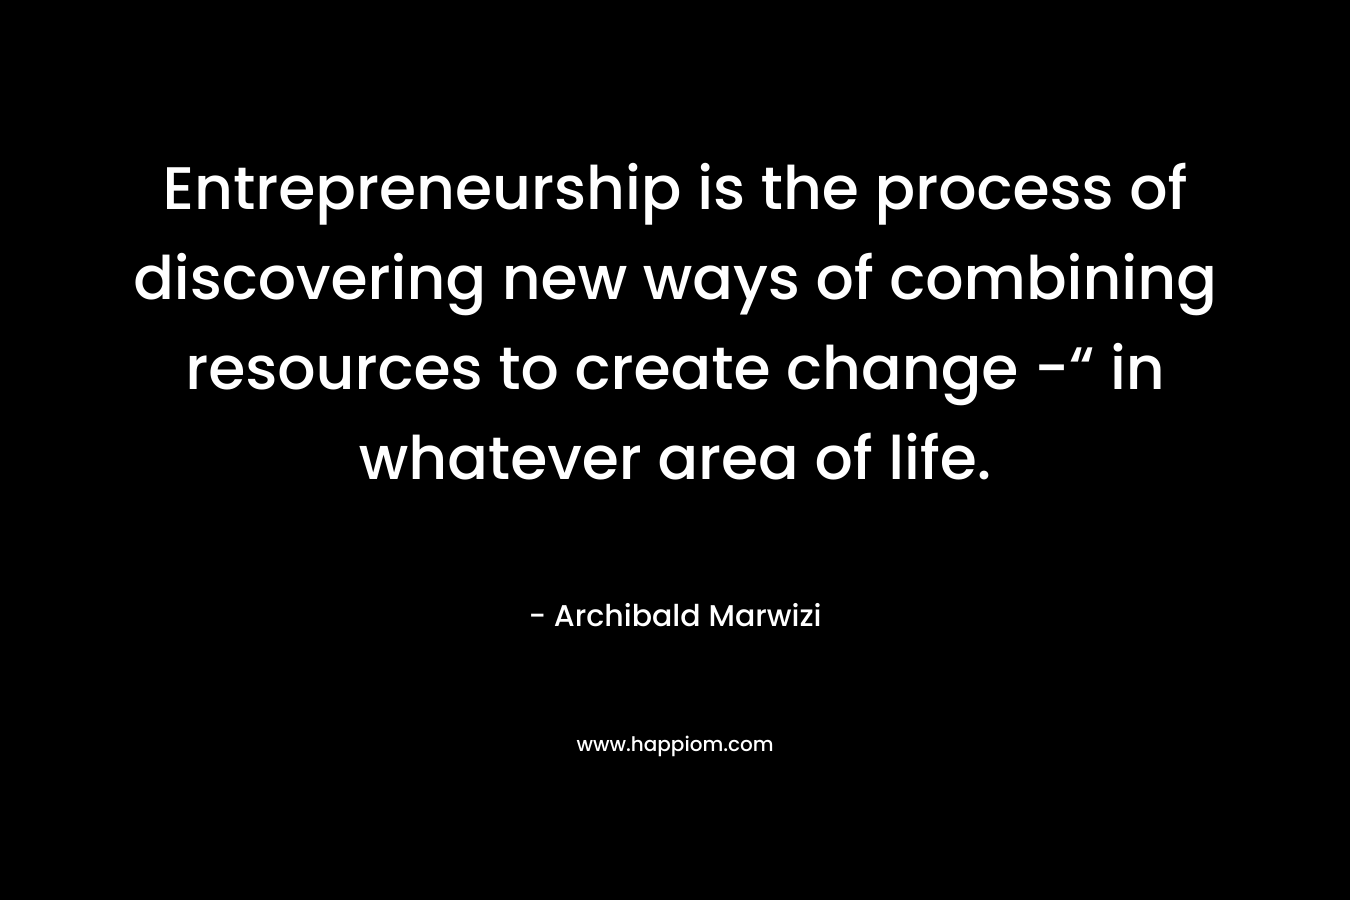 Entrepreneurship is the process of discovering new ways of combining resources to create change -“ in whatever area of life.